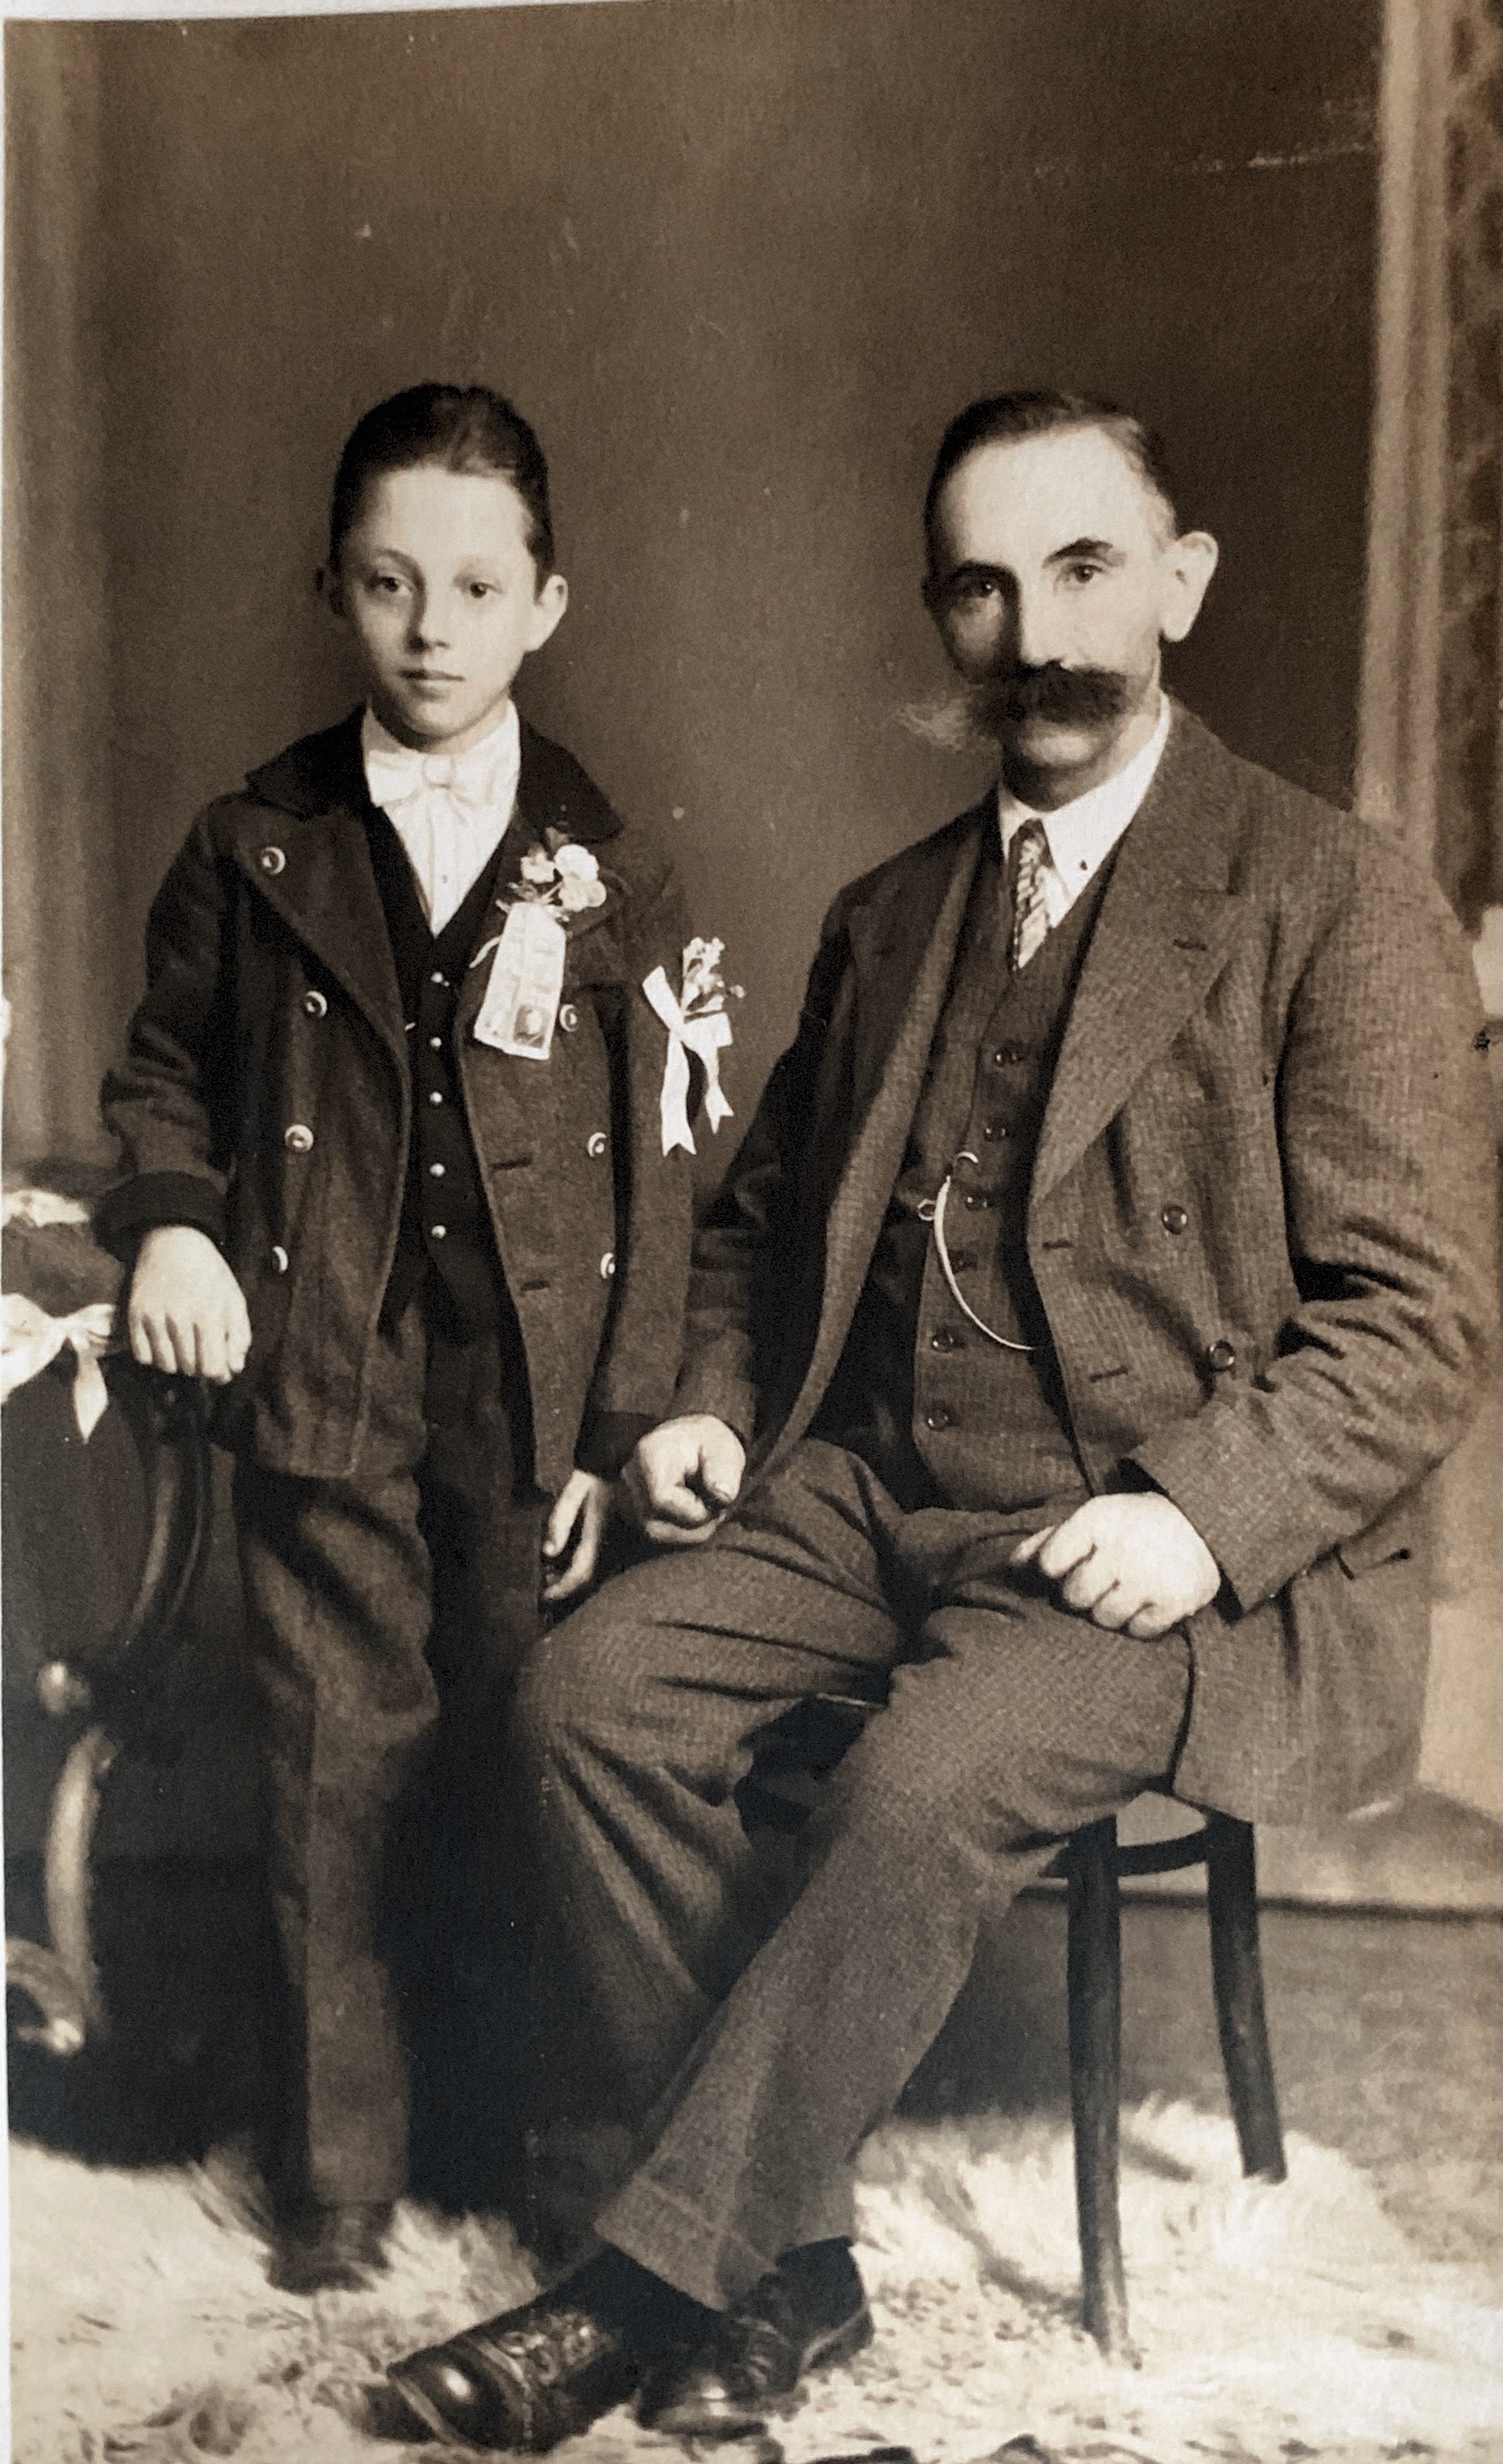 My Great-Grandpa Anton with his Father Franz, 1910, Vienna